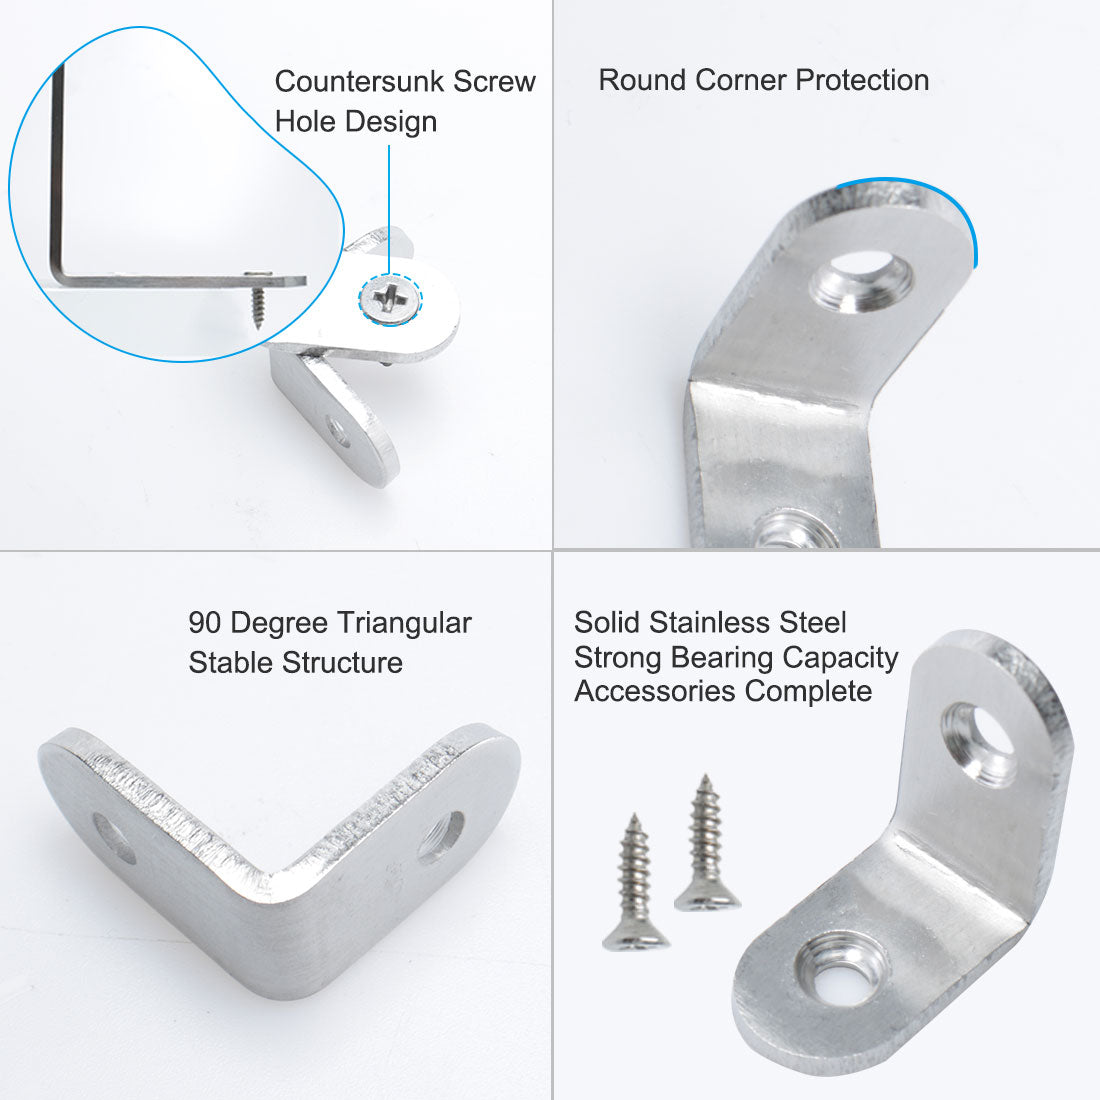 uxcell Uxcell Angle Bracket Stainless Steel Brace Fastener Support w Screws 25 x 25mm, 30pcs